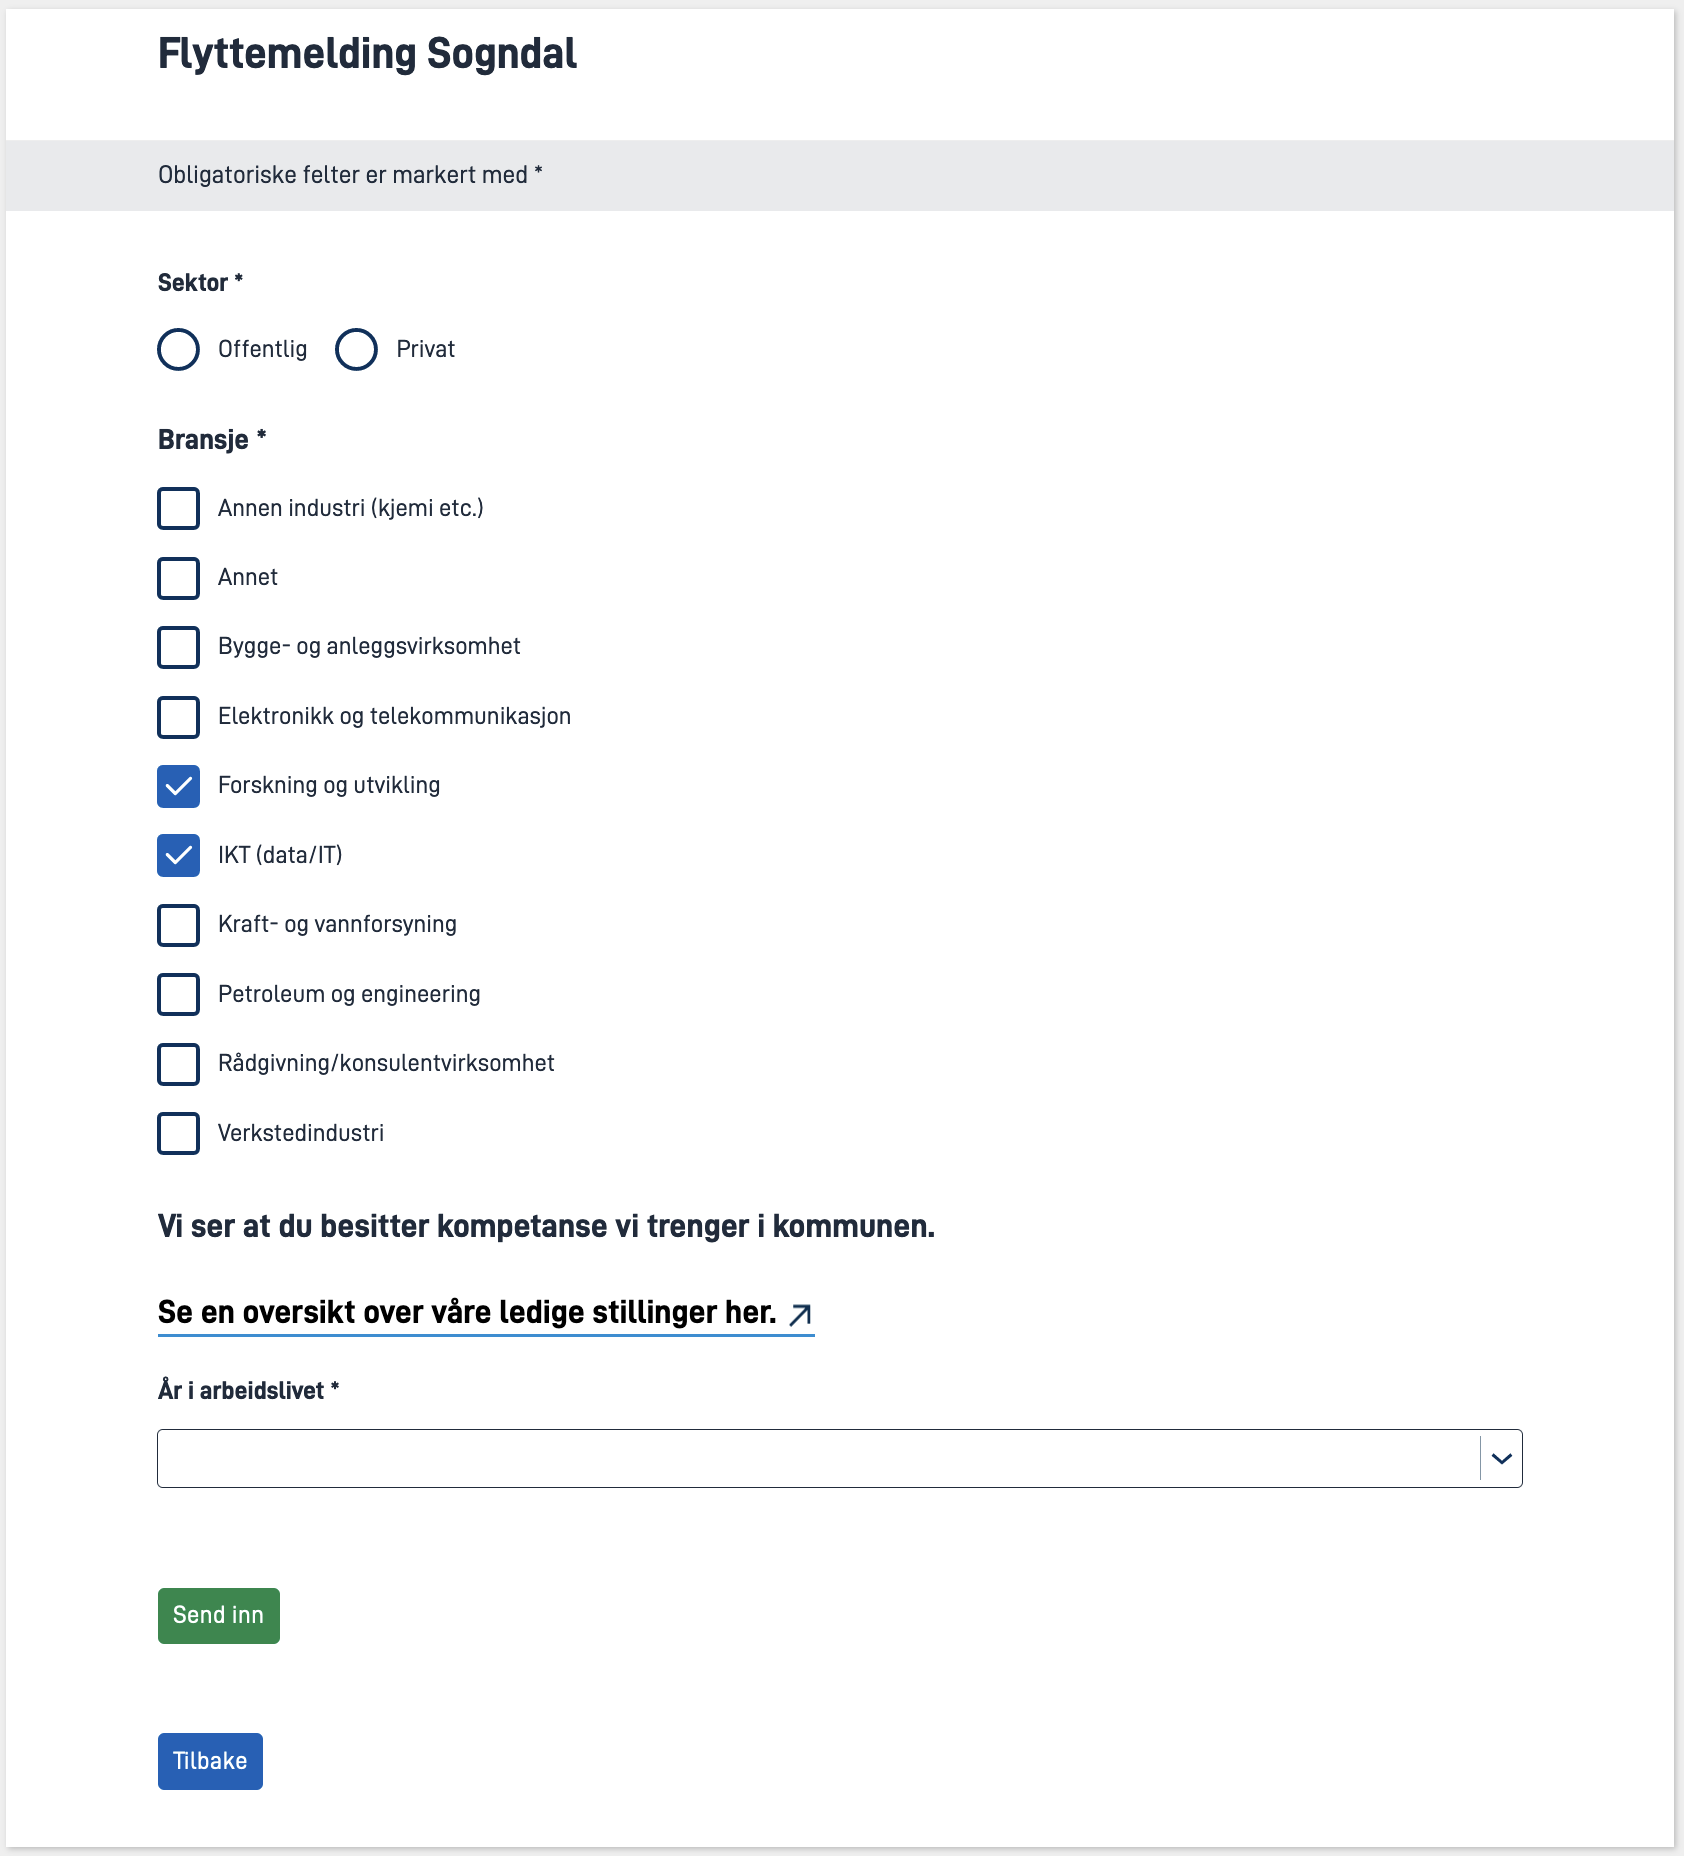 Screenshot of form collecting employment information for the private sector